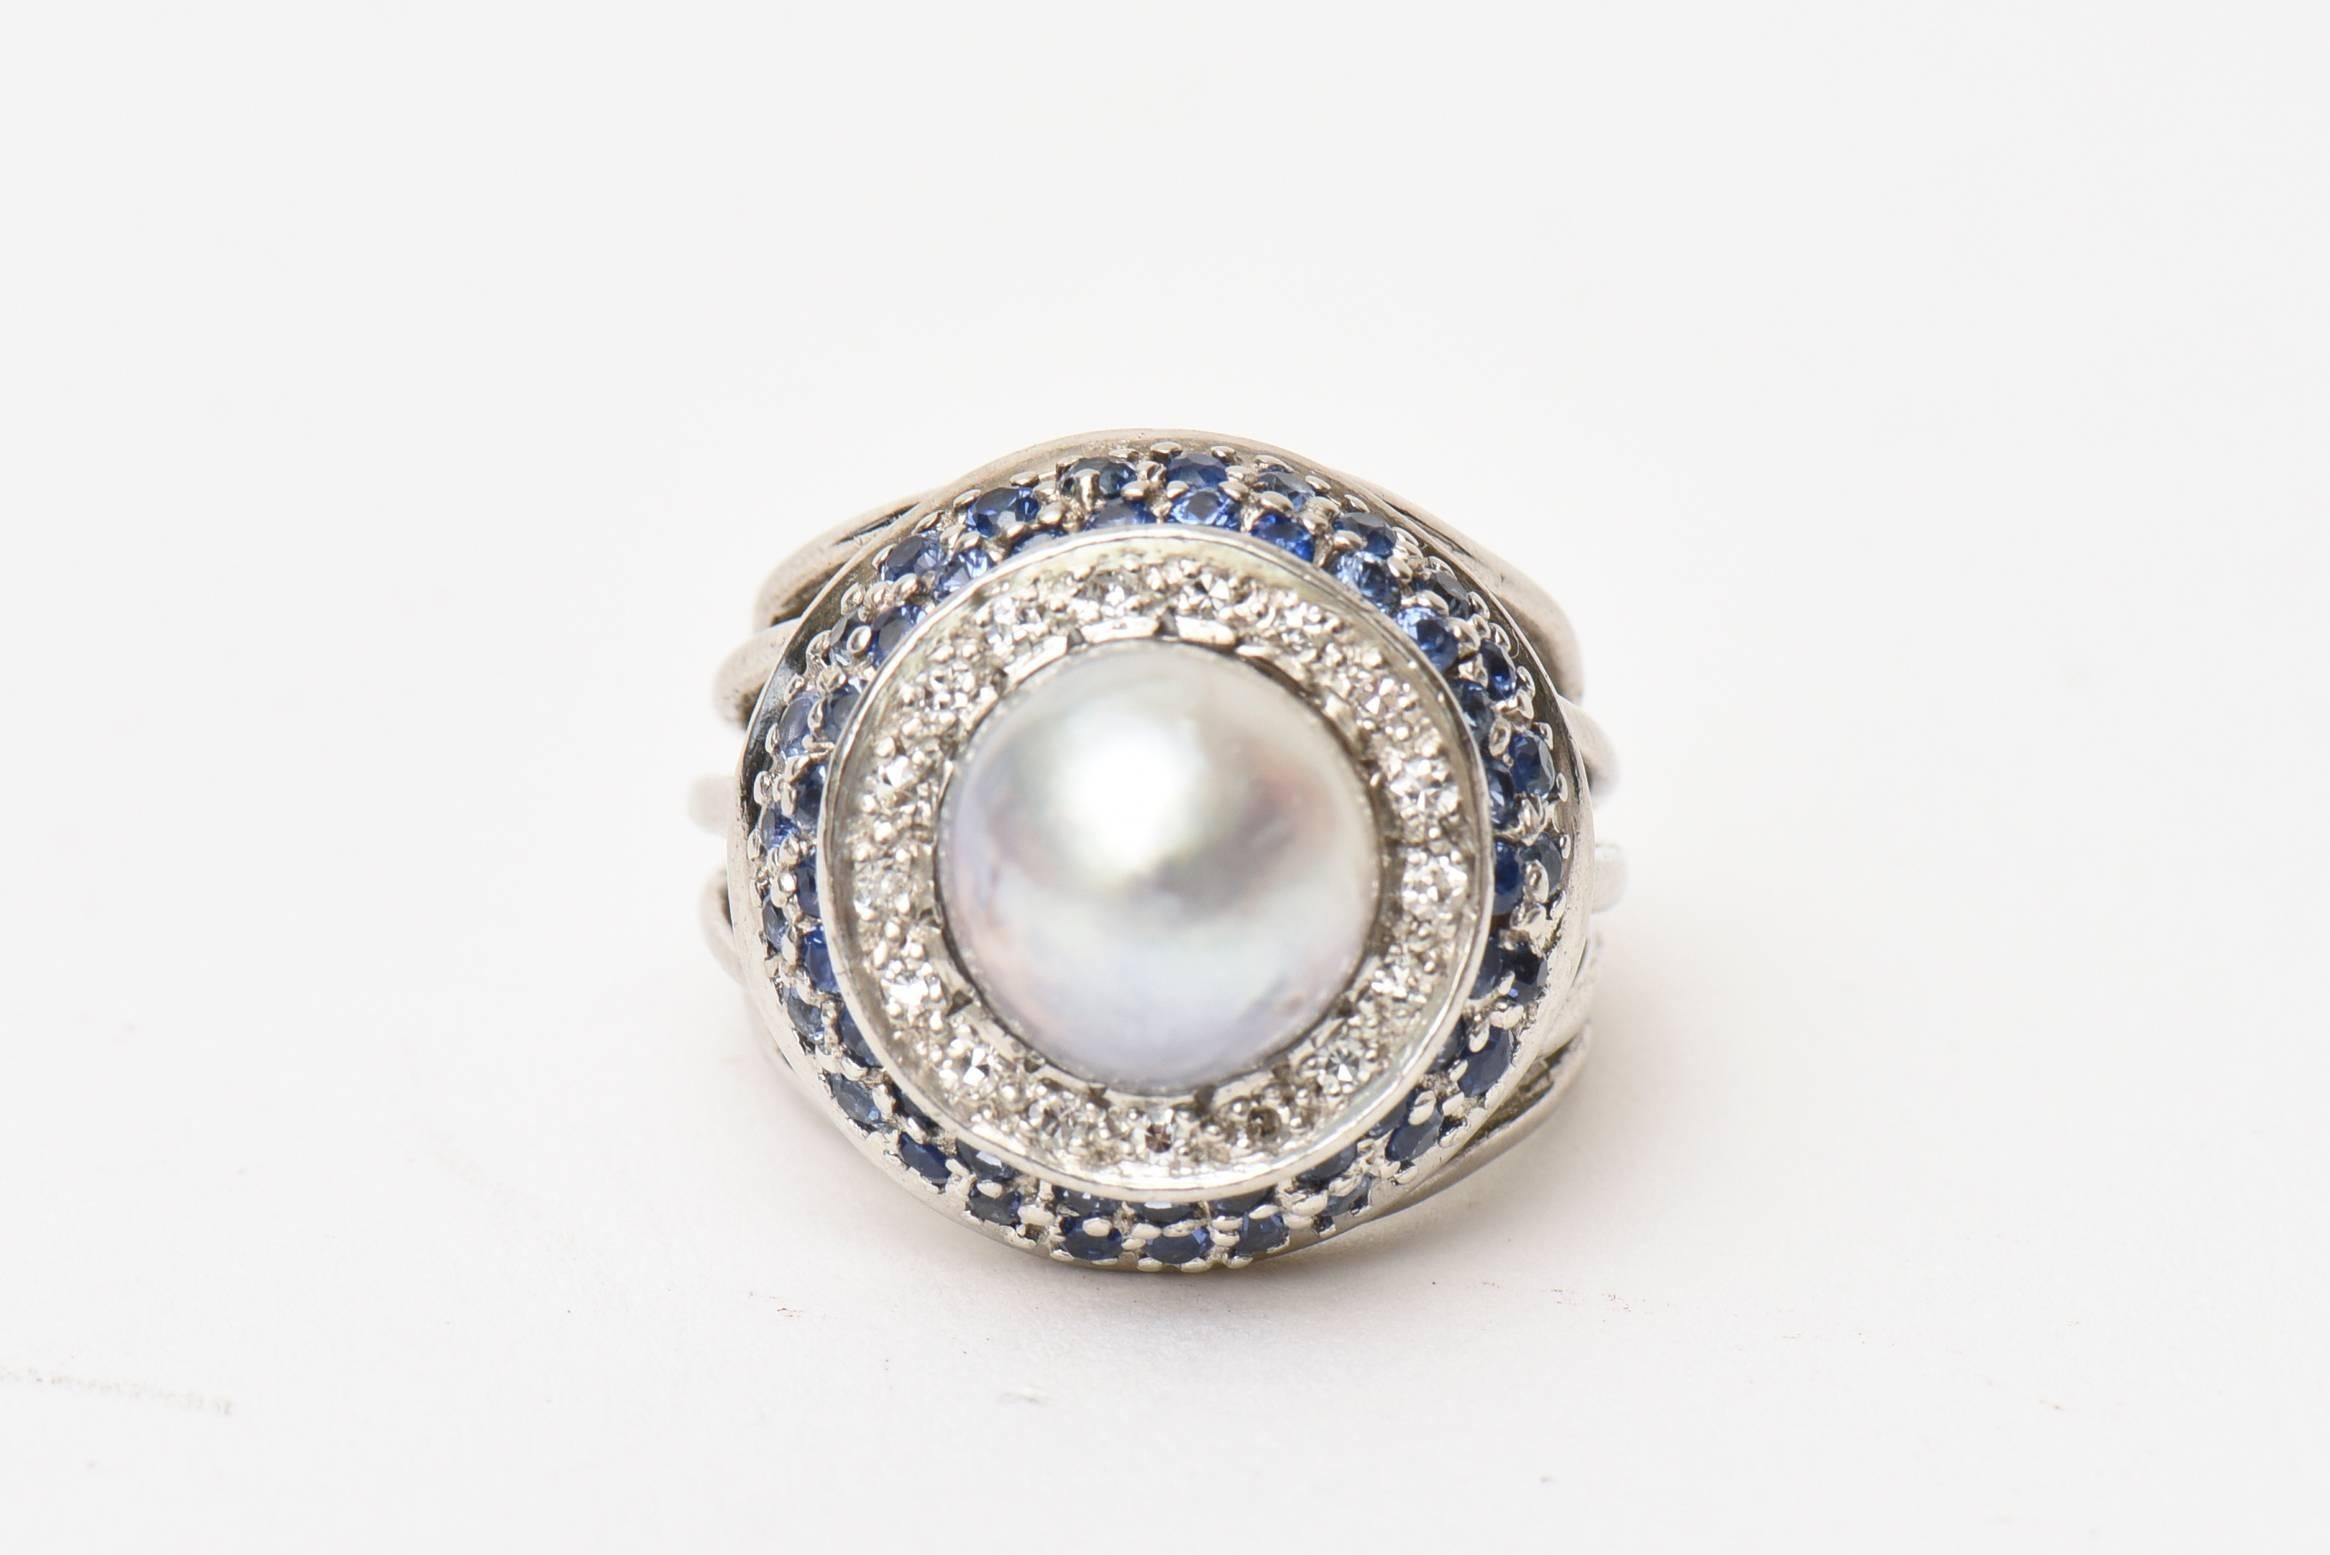 This classic and vintage dome cocktail ring features elements of an off gray cultured round pearl, sixteen round cut diamonds and and fifty round mixed sapphires. It is timeless and elegant. Great for day or evening. There are 5 bands of 14K white